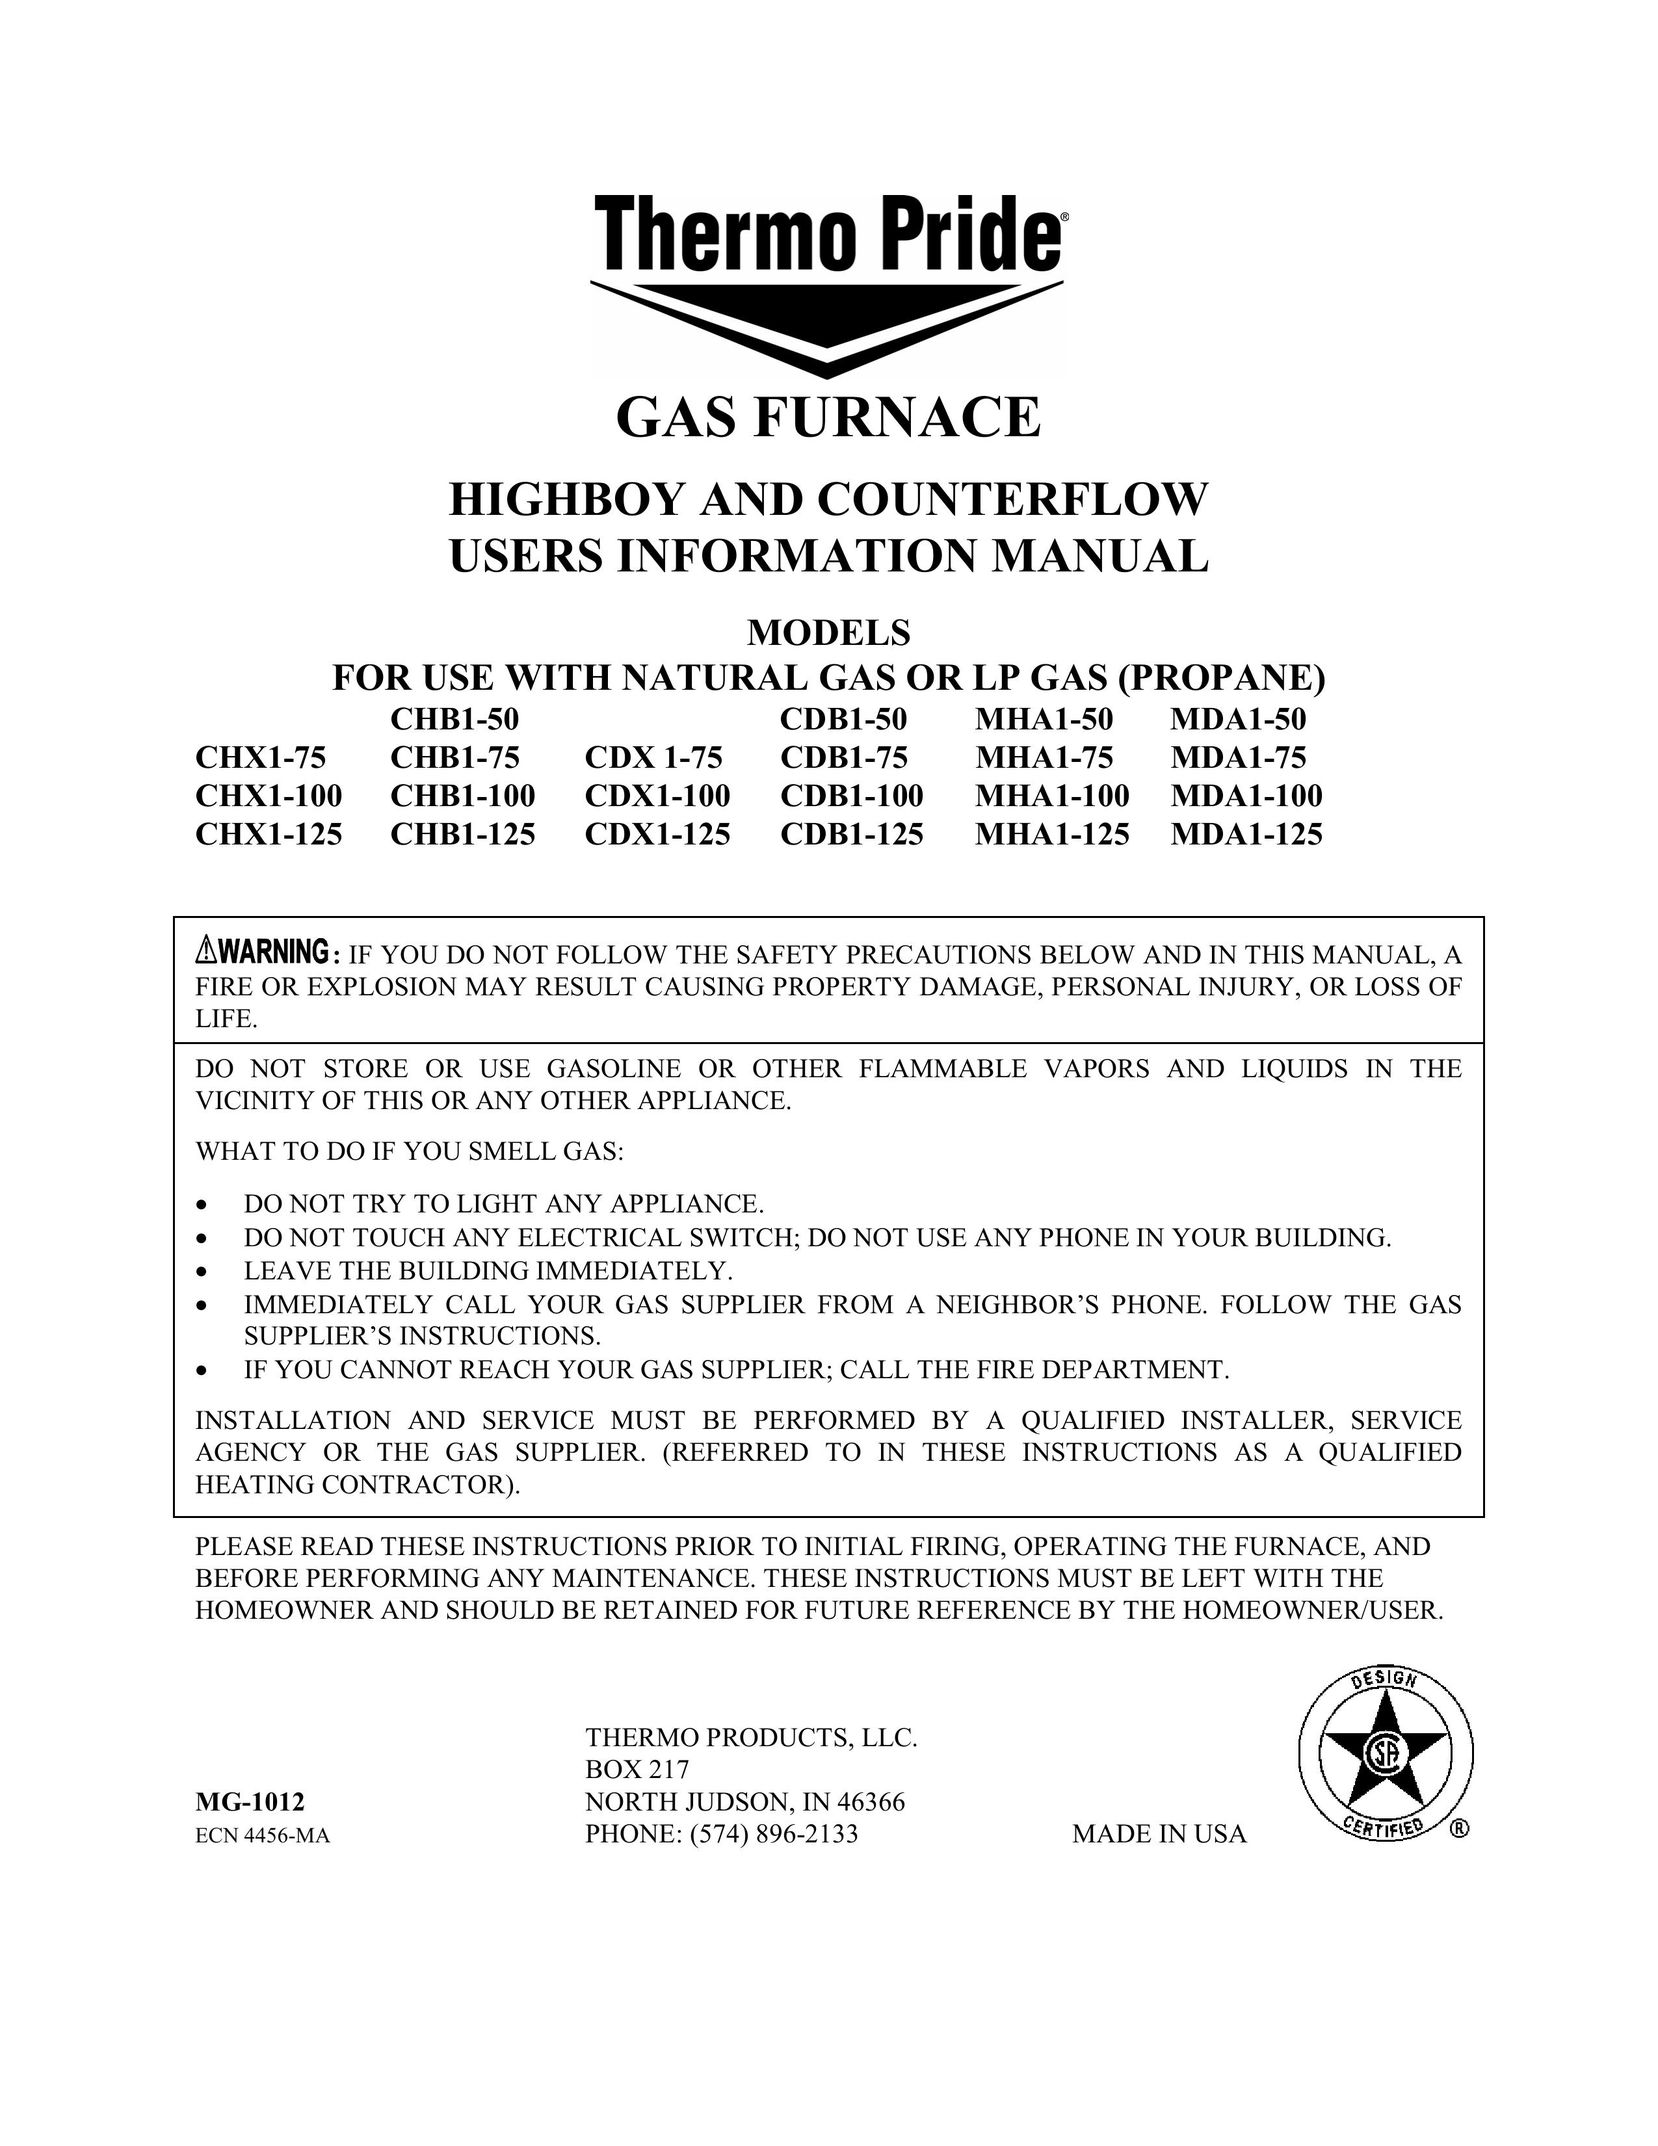 Thermo Products CDB1-75 Furnace User Manual